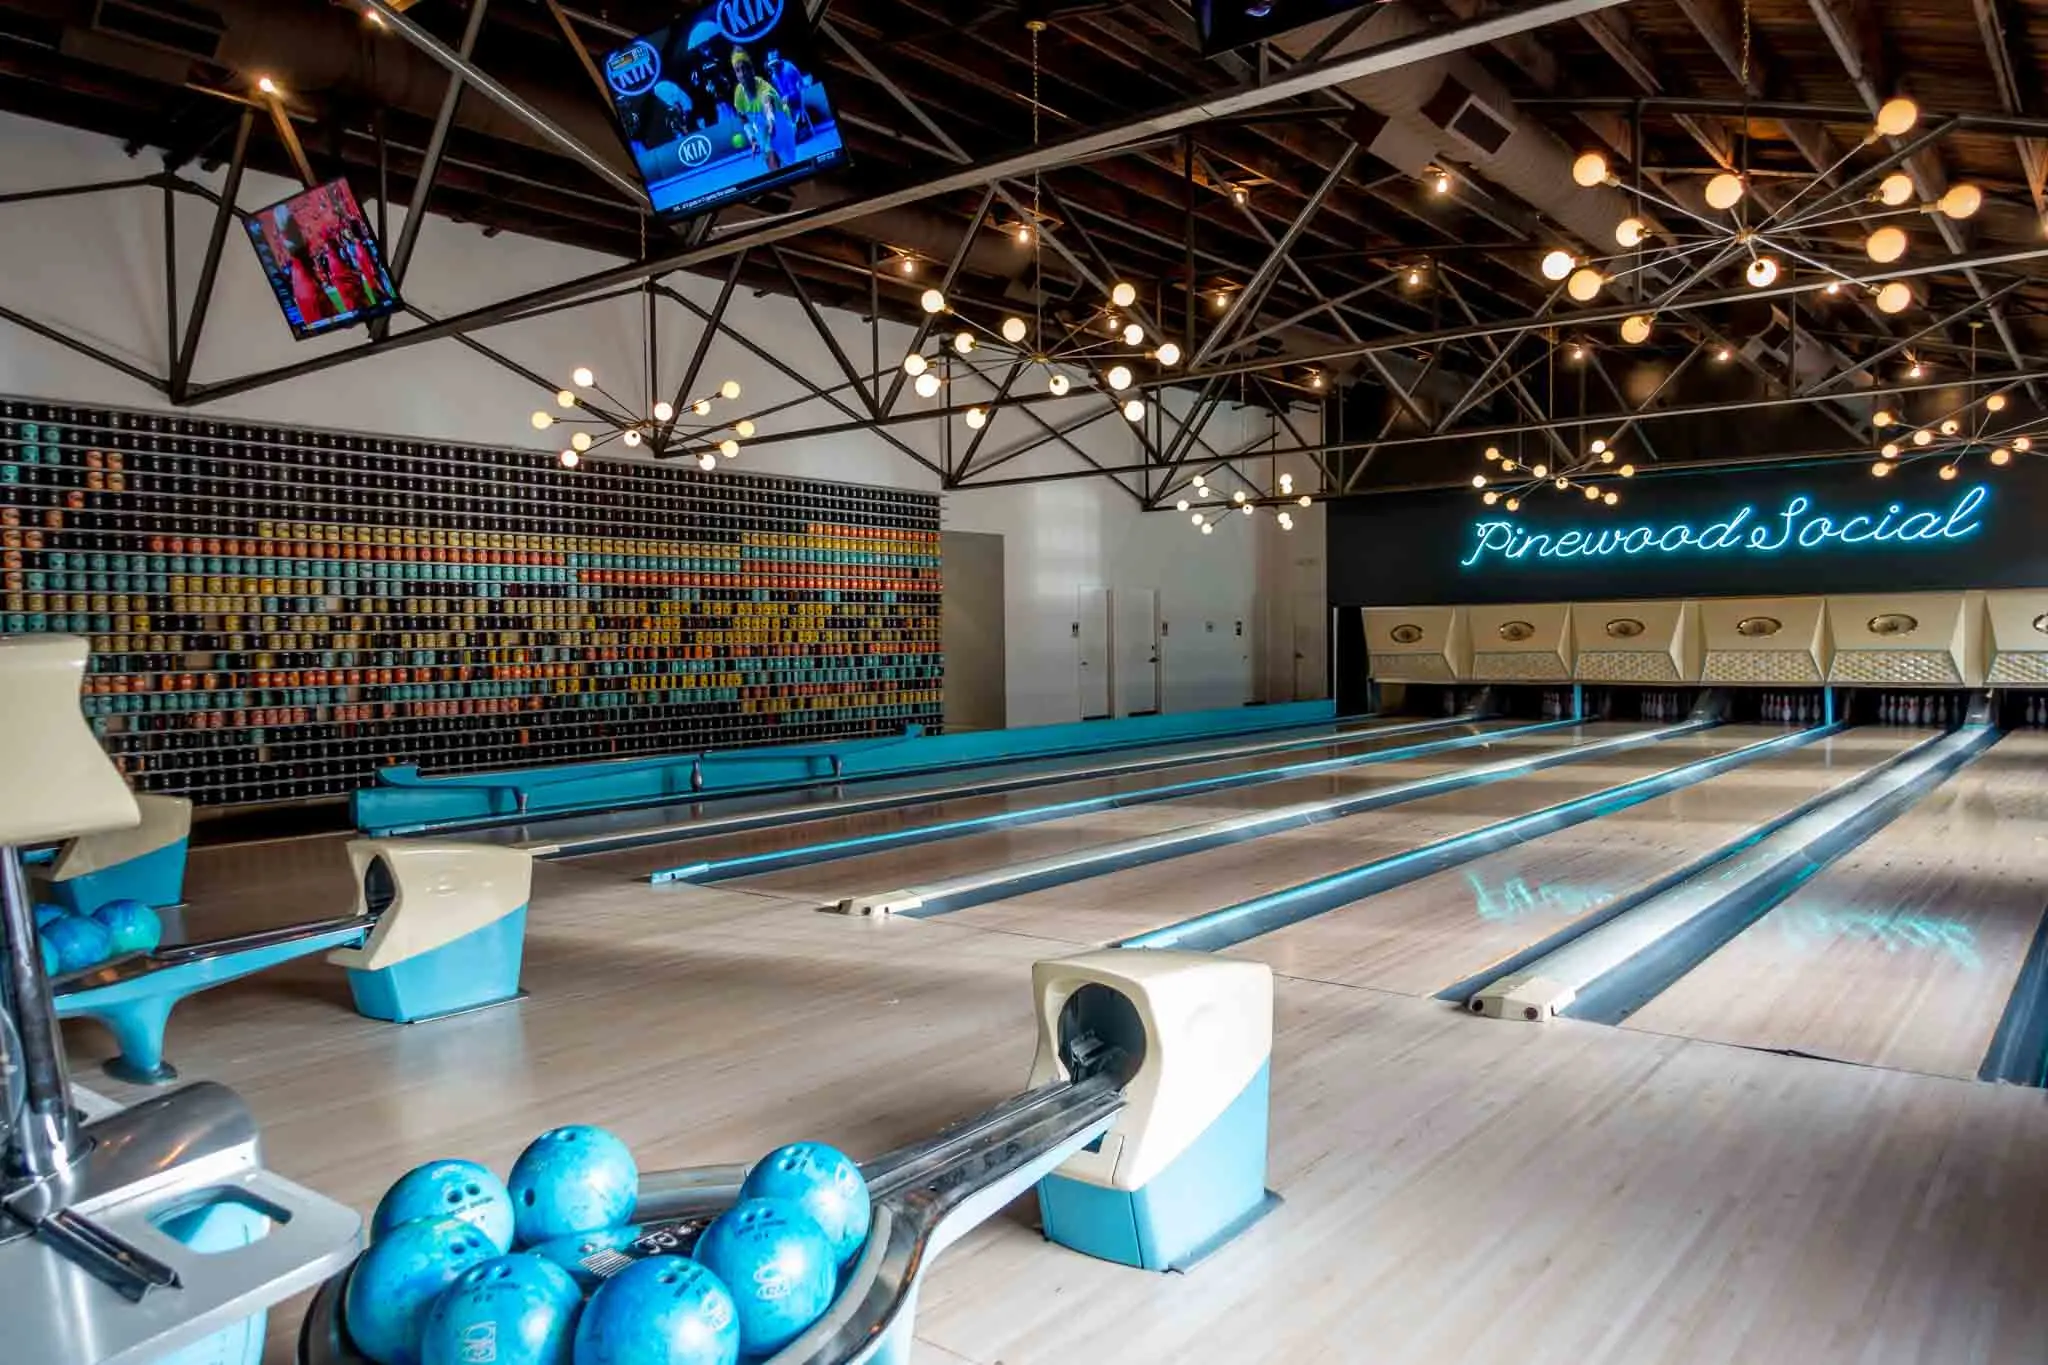 Bowling lanes with turquoise accents and a turquoise neon sign for Pinewood Social